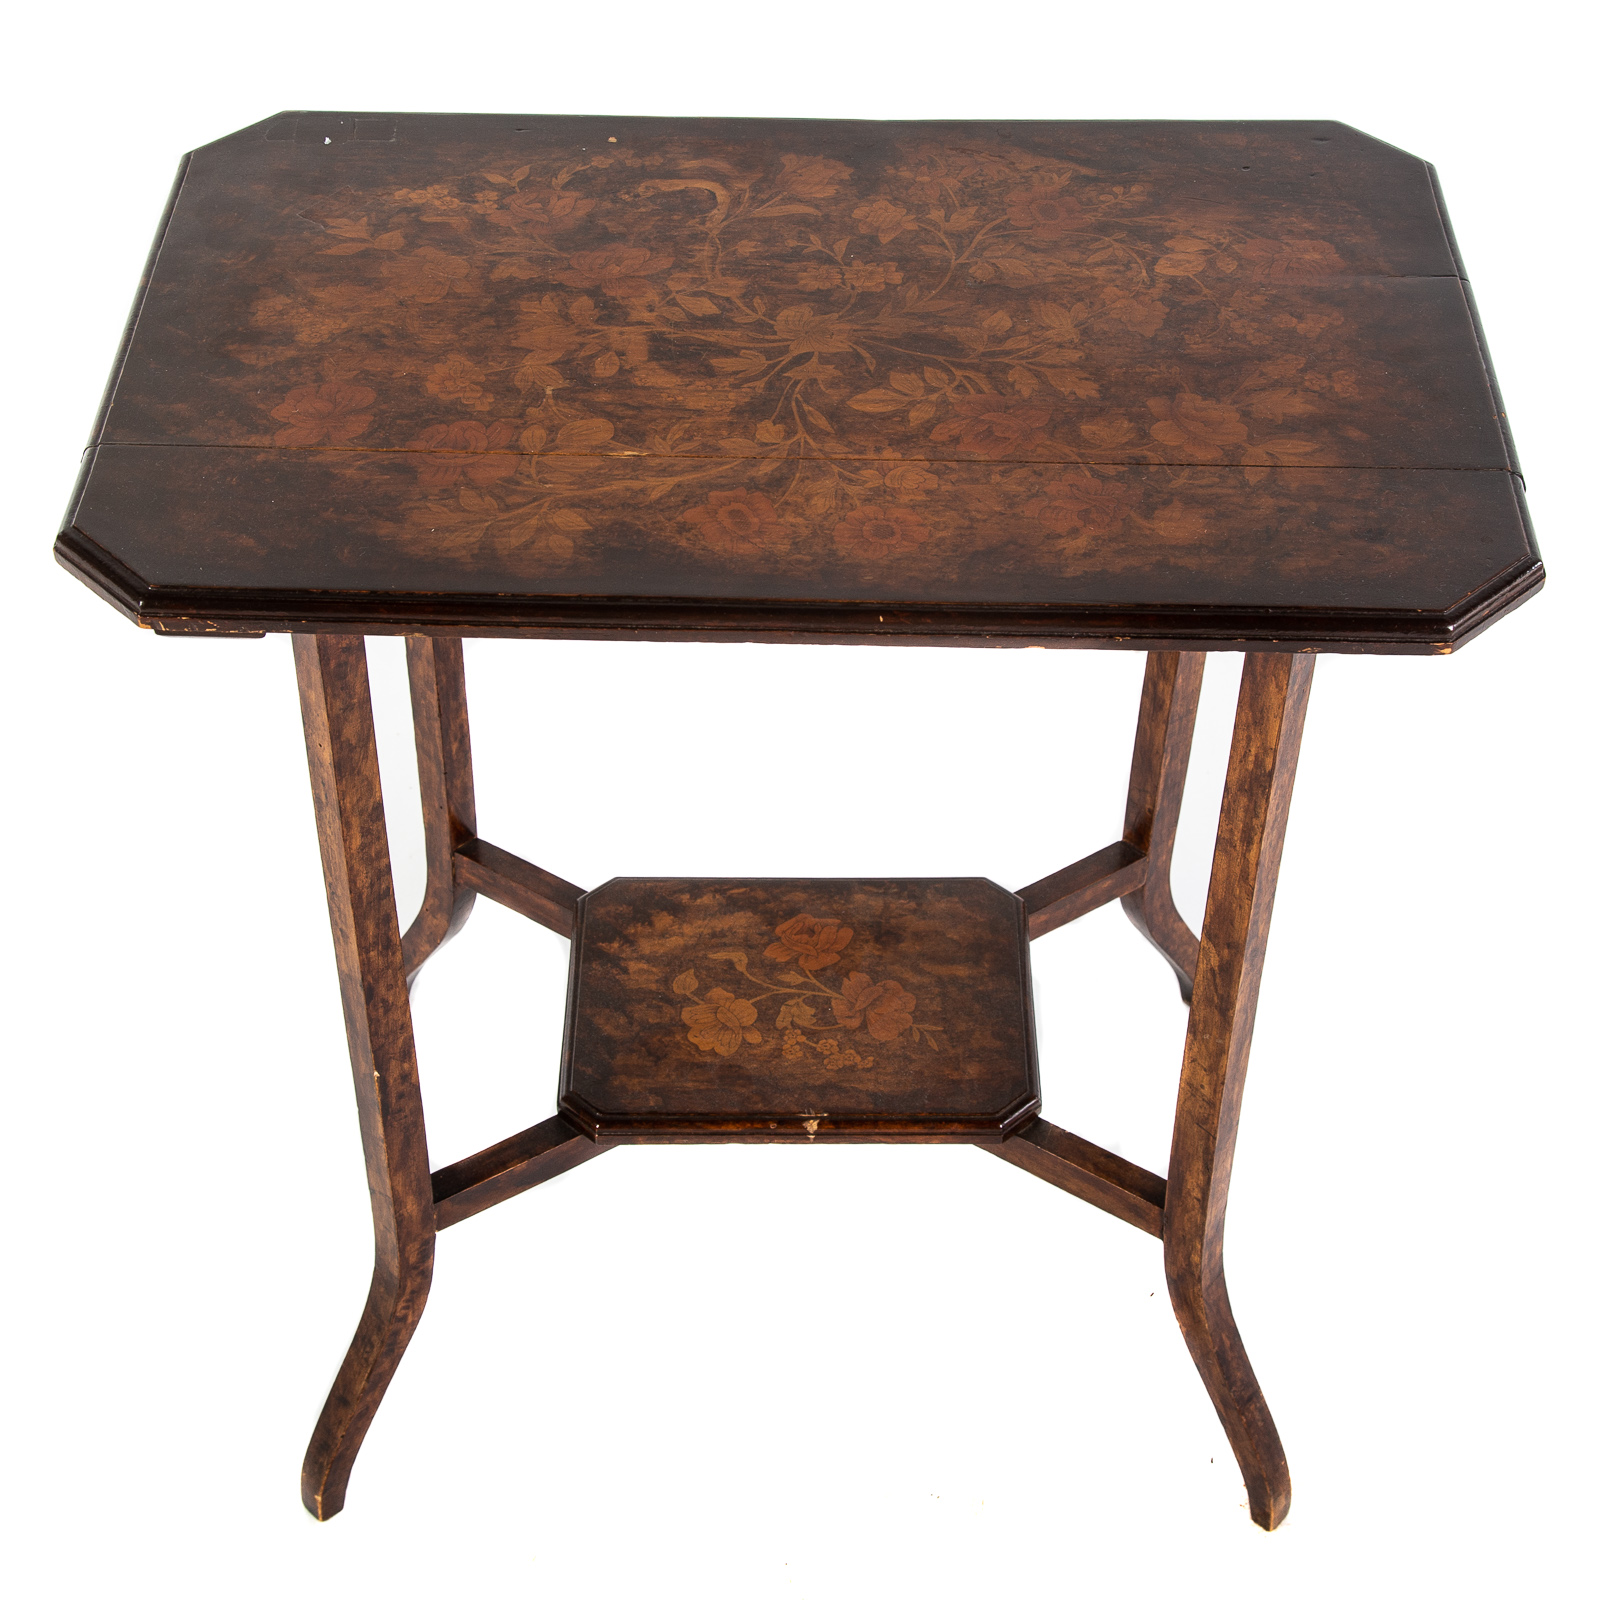 DUTCH STYLE INLAID MARQUETRY SIDE TABLE